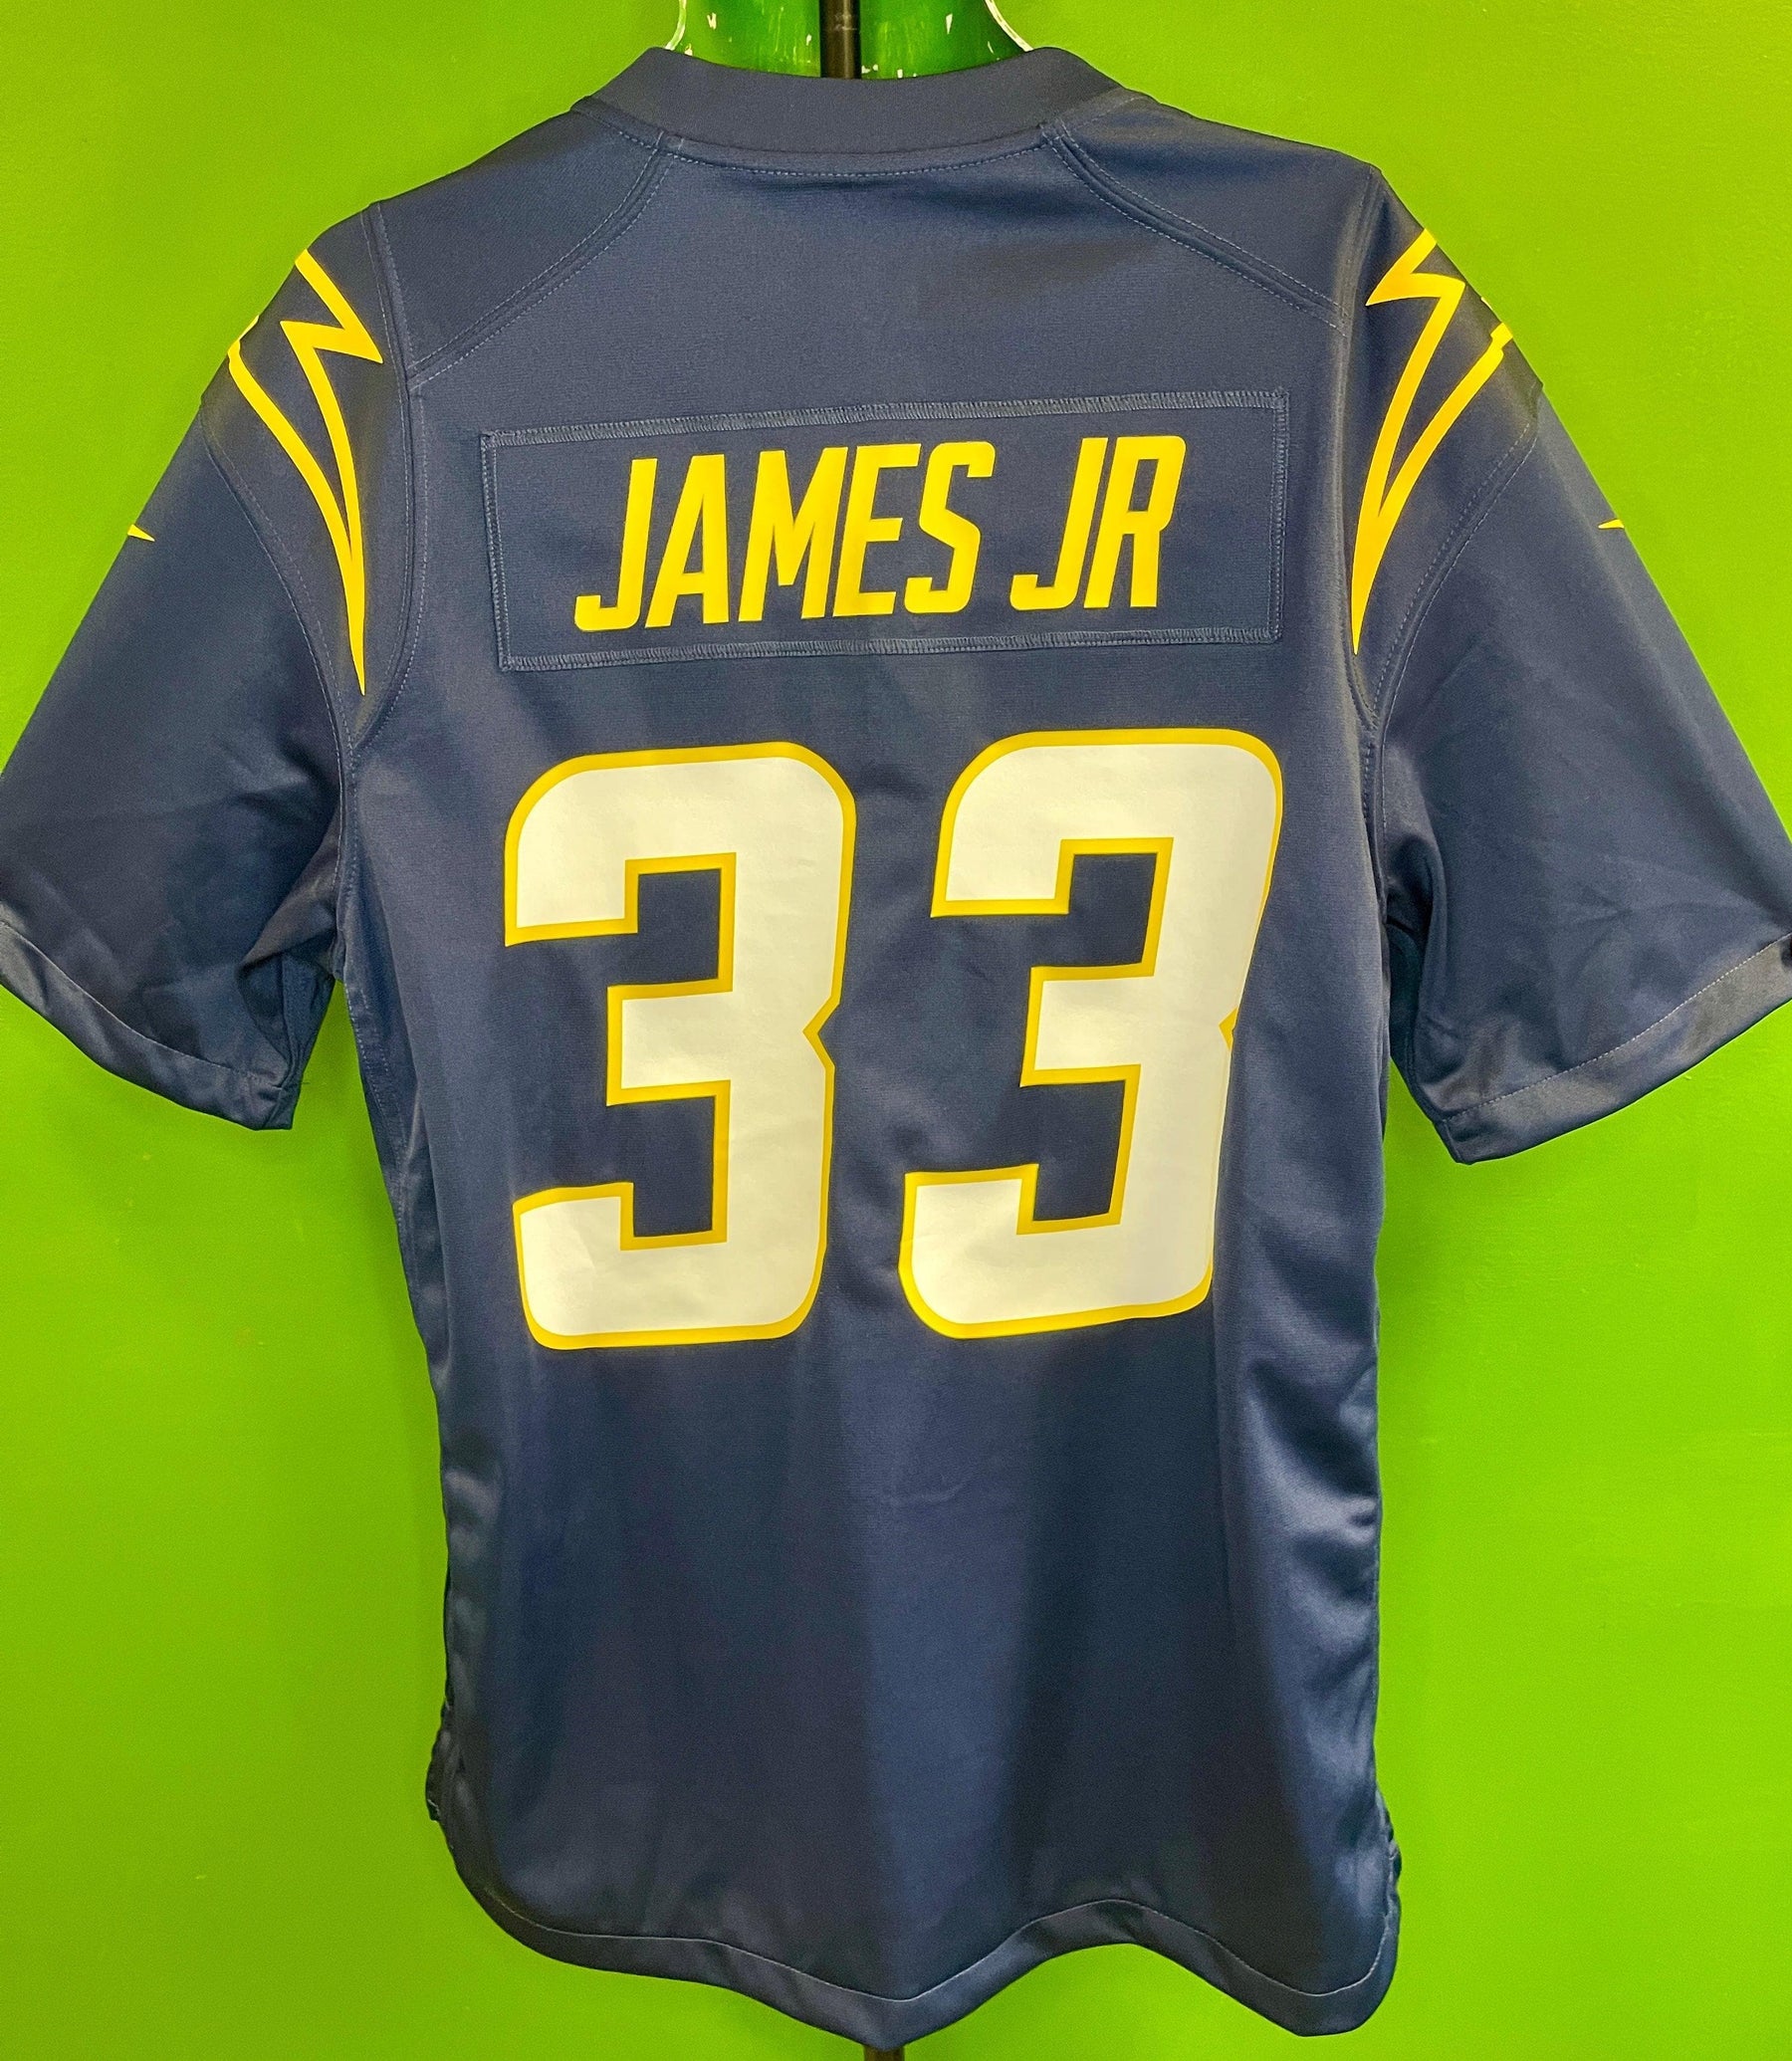 NFL Los Angeles Chargers (Derwin James) Men's Game Football Jersey.